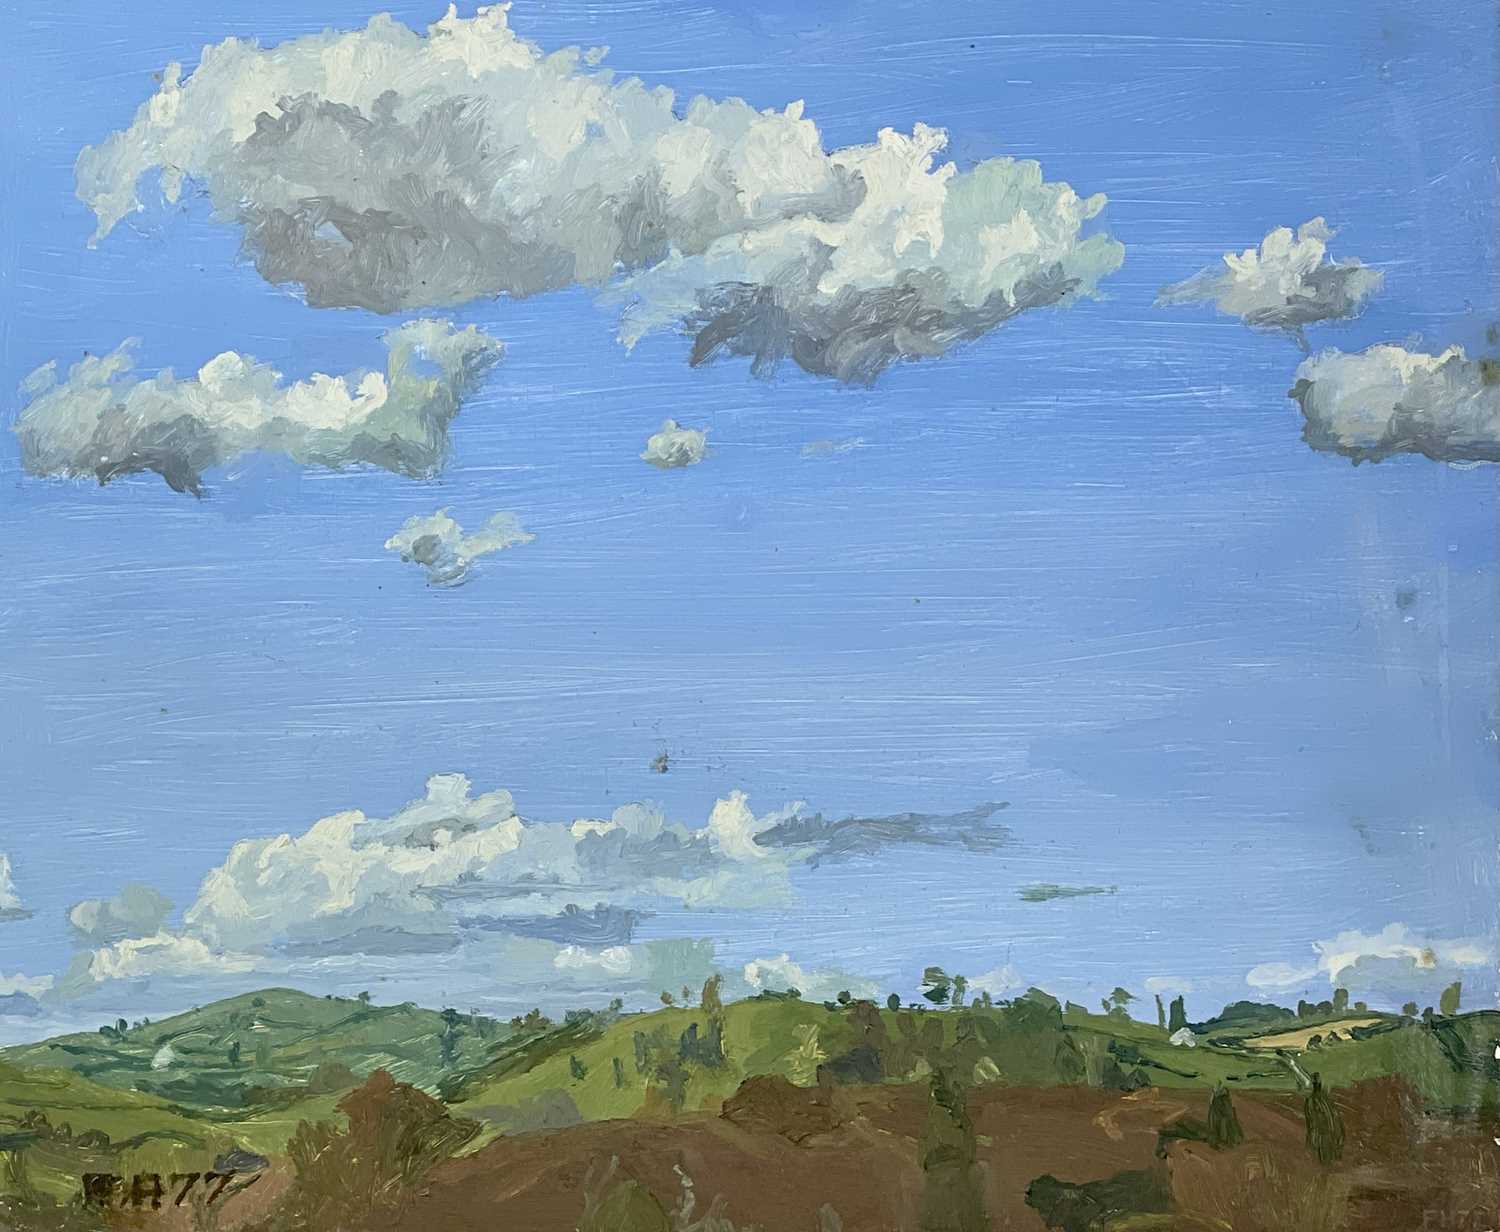 Lot 27 - Francis HEWLETT (1930-2012) Clouds and Hill...